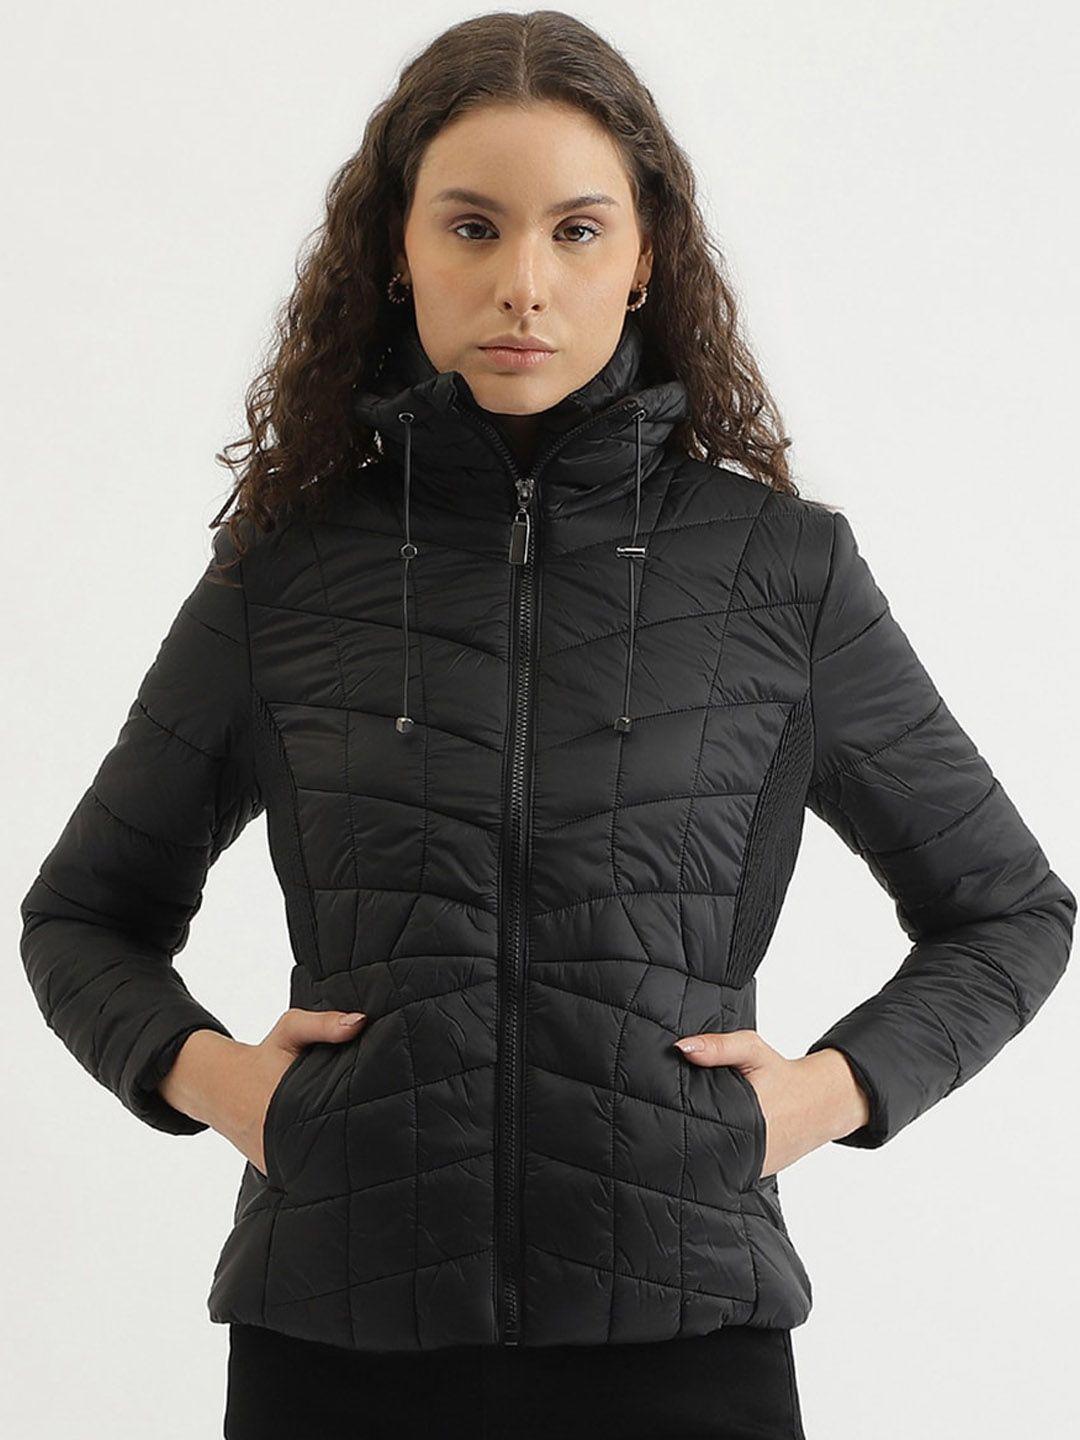 united-colors-of-benetton-women-black-quilted-jacket